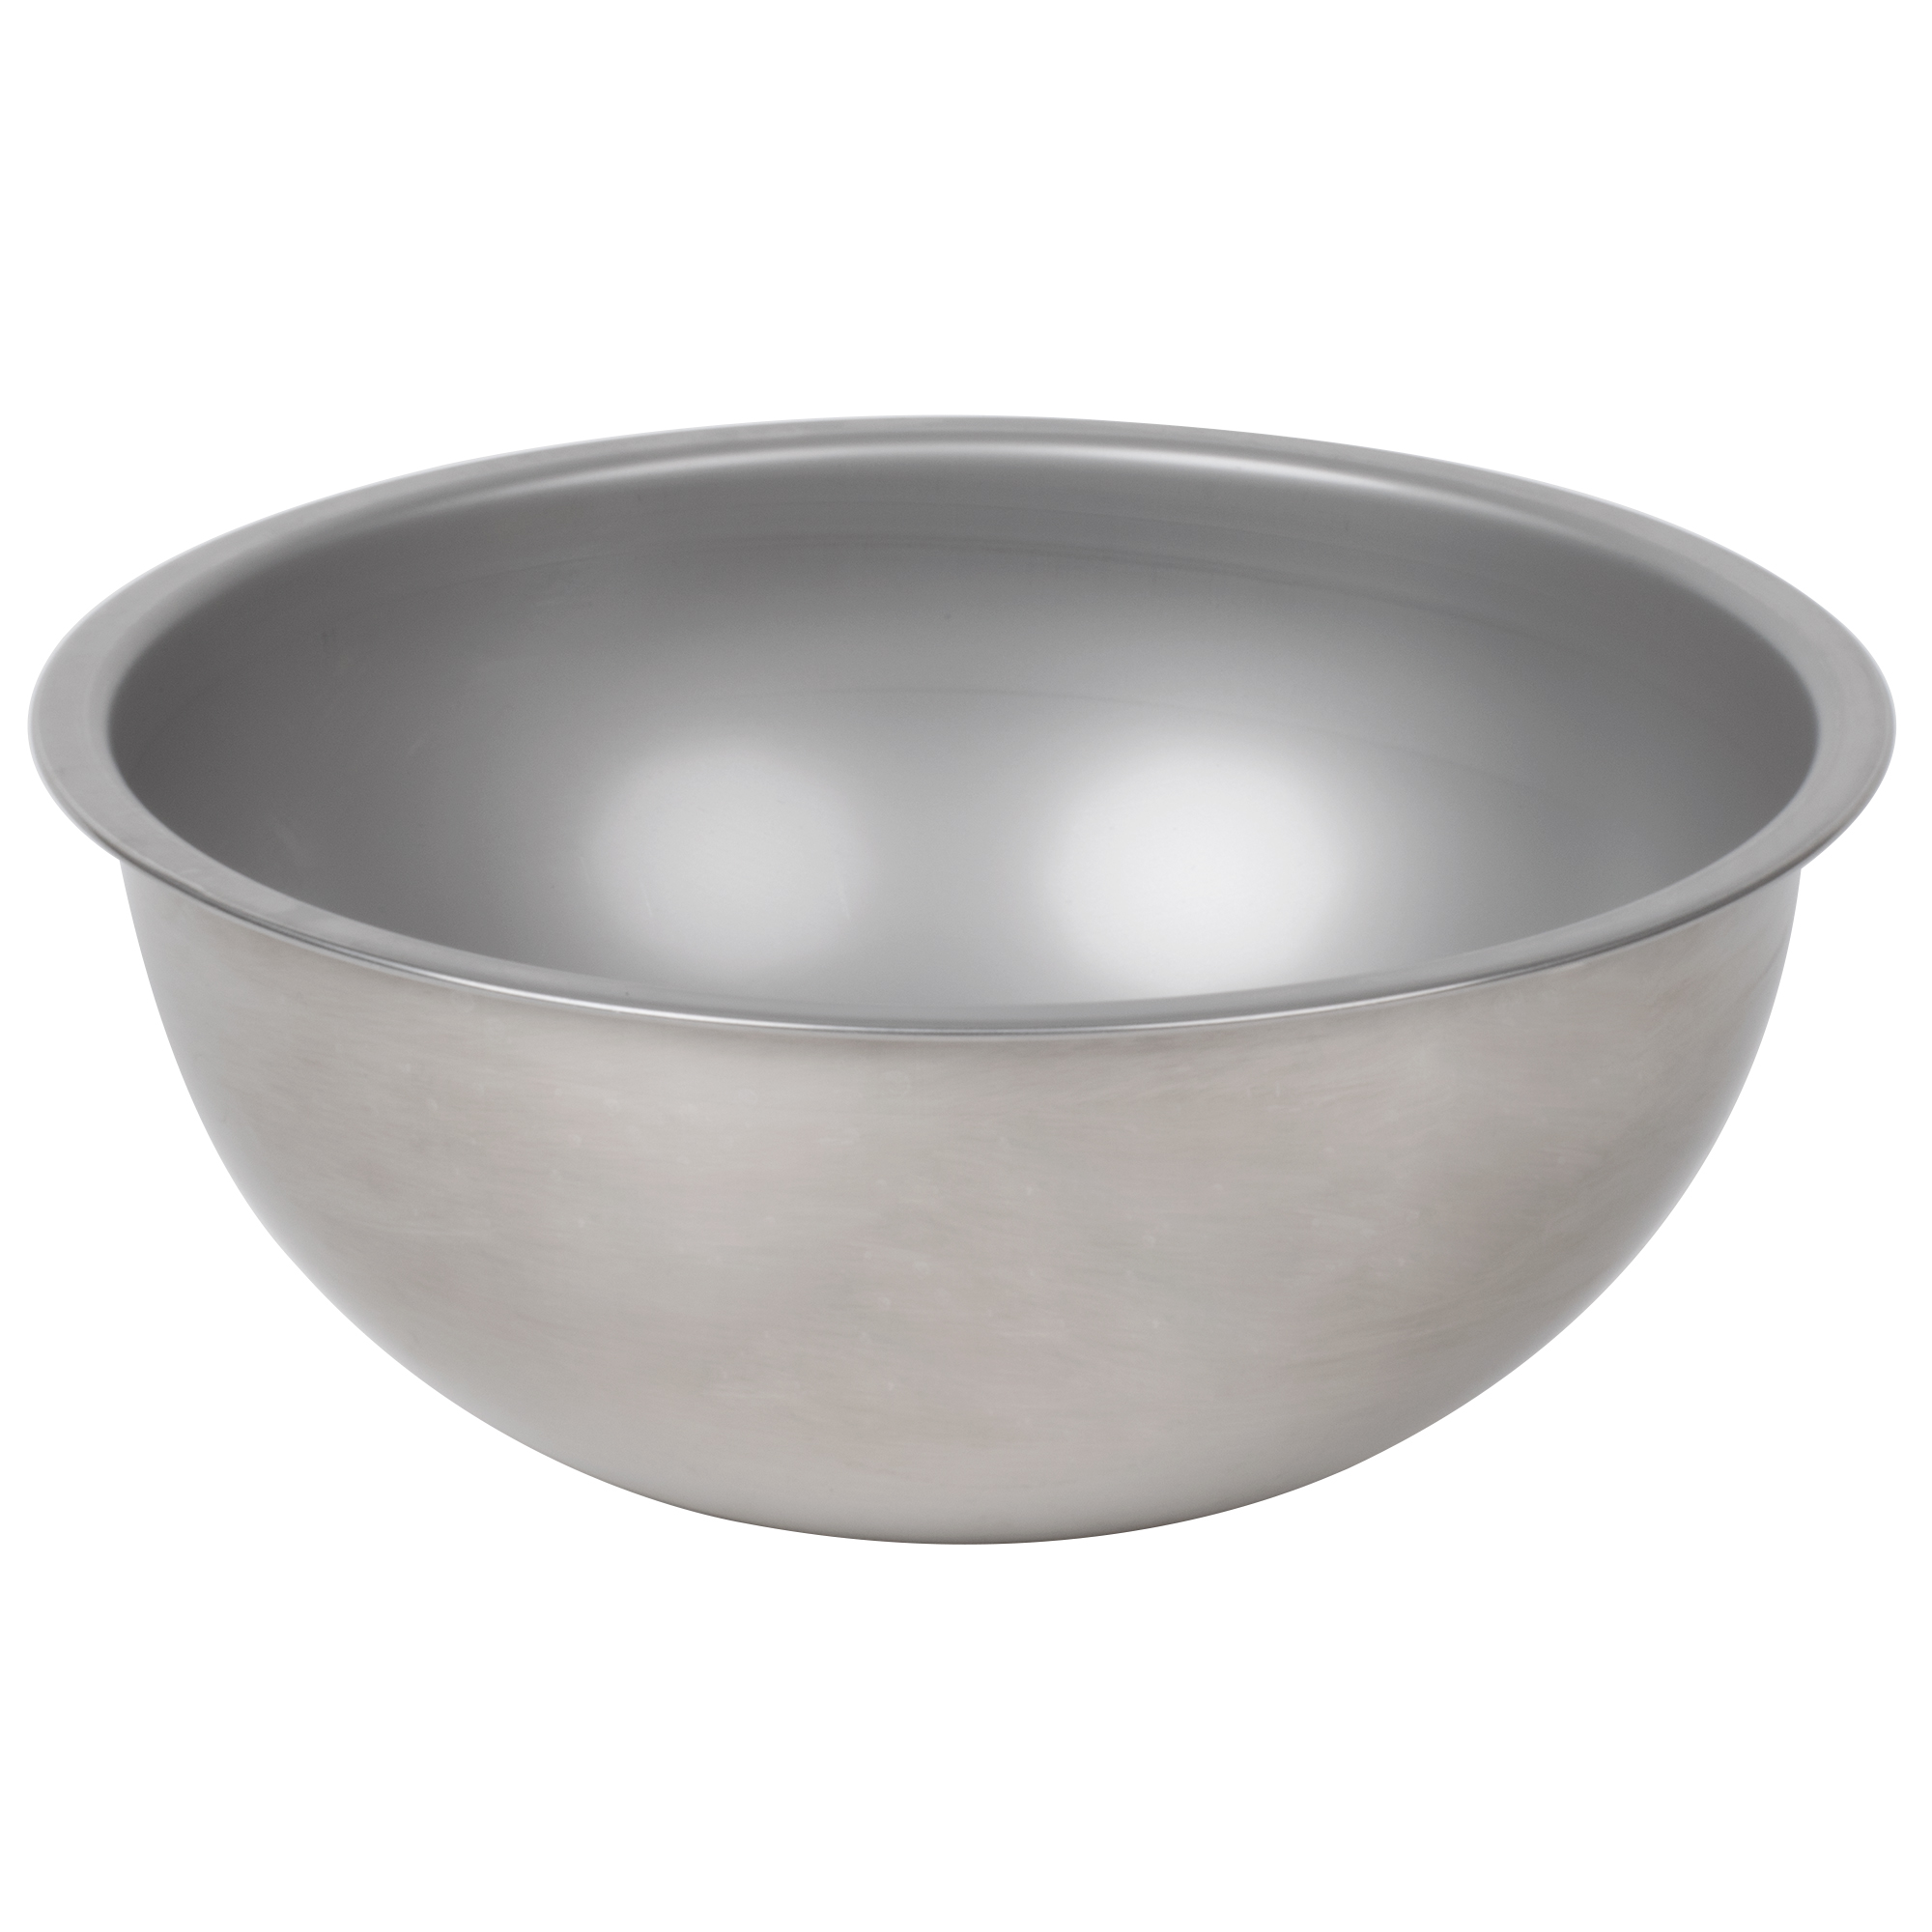 heavy duty stainless steel mixing bowls set of 4